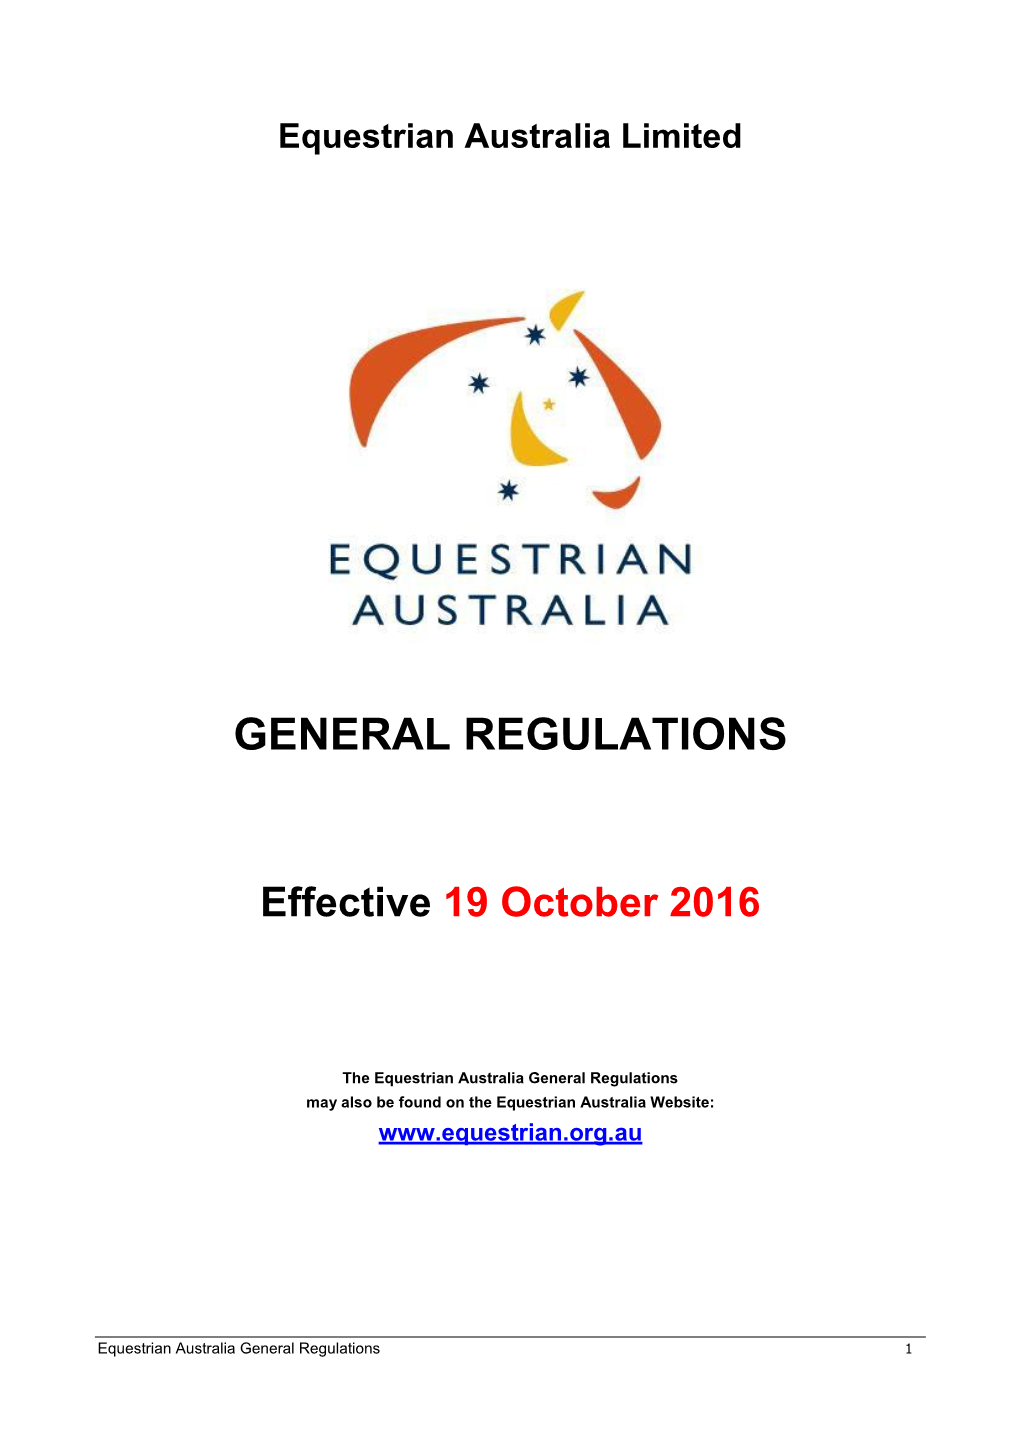 Equestrian Australia General Regulations May Also Be Found on the Equestrian Australia Website